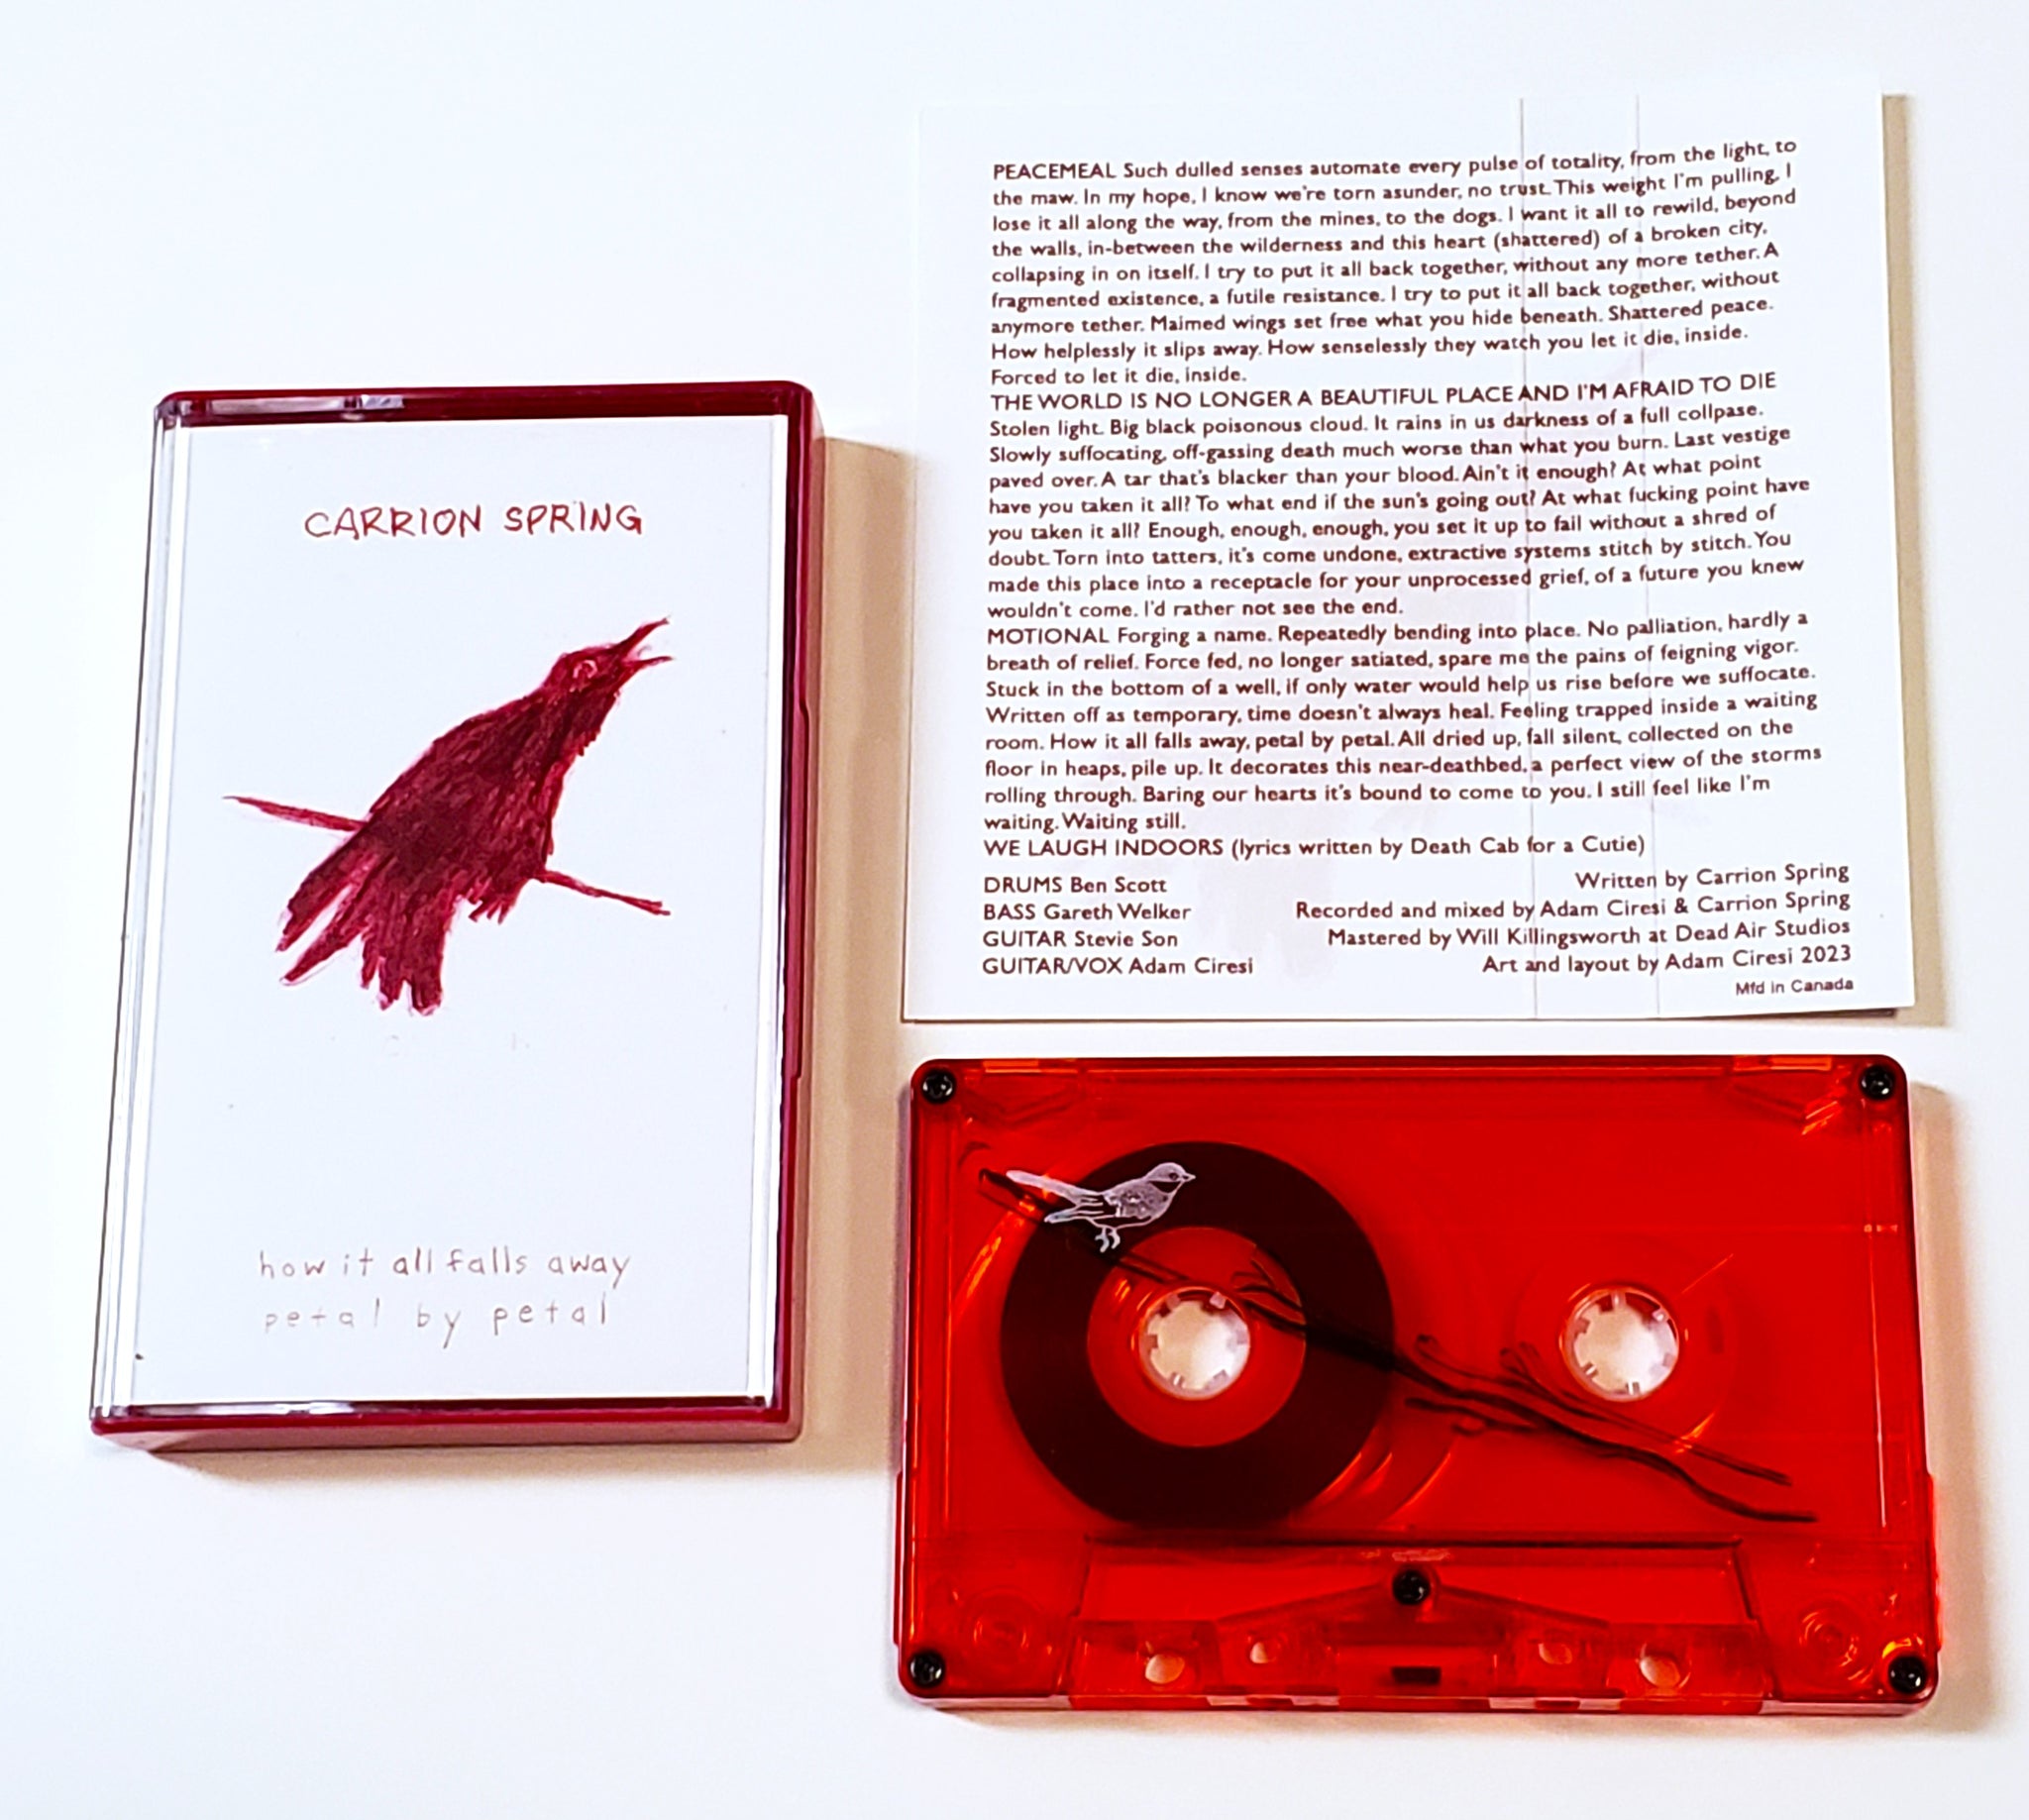 CARRION SPRING - How it all falls away petal by petal (cassette)